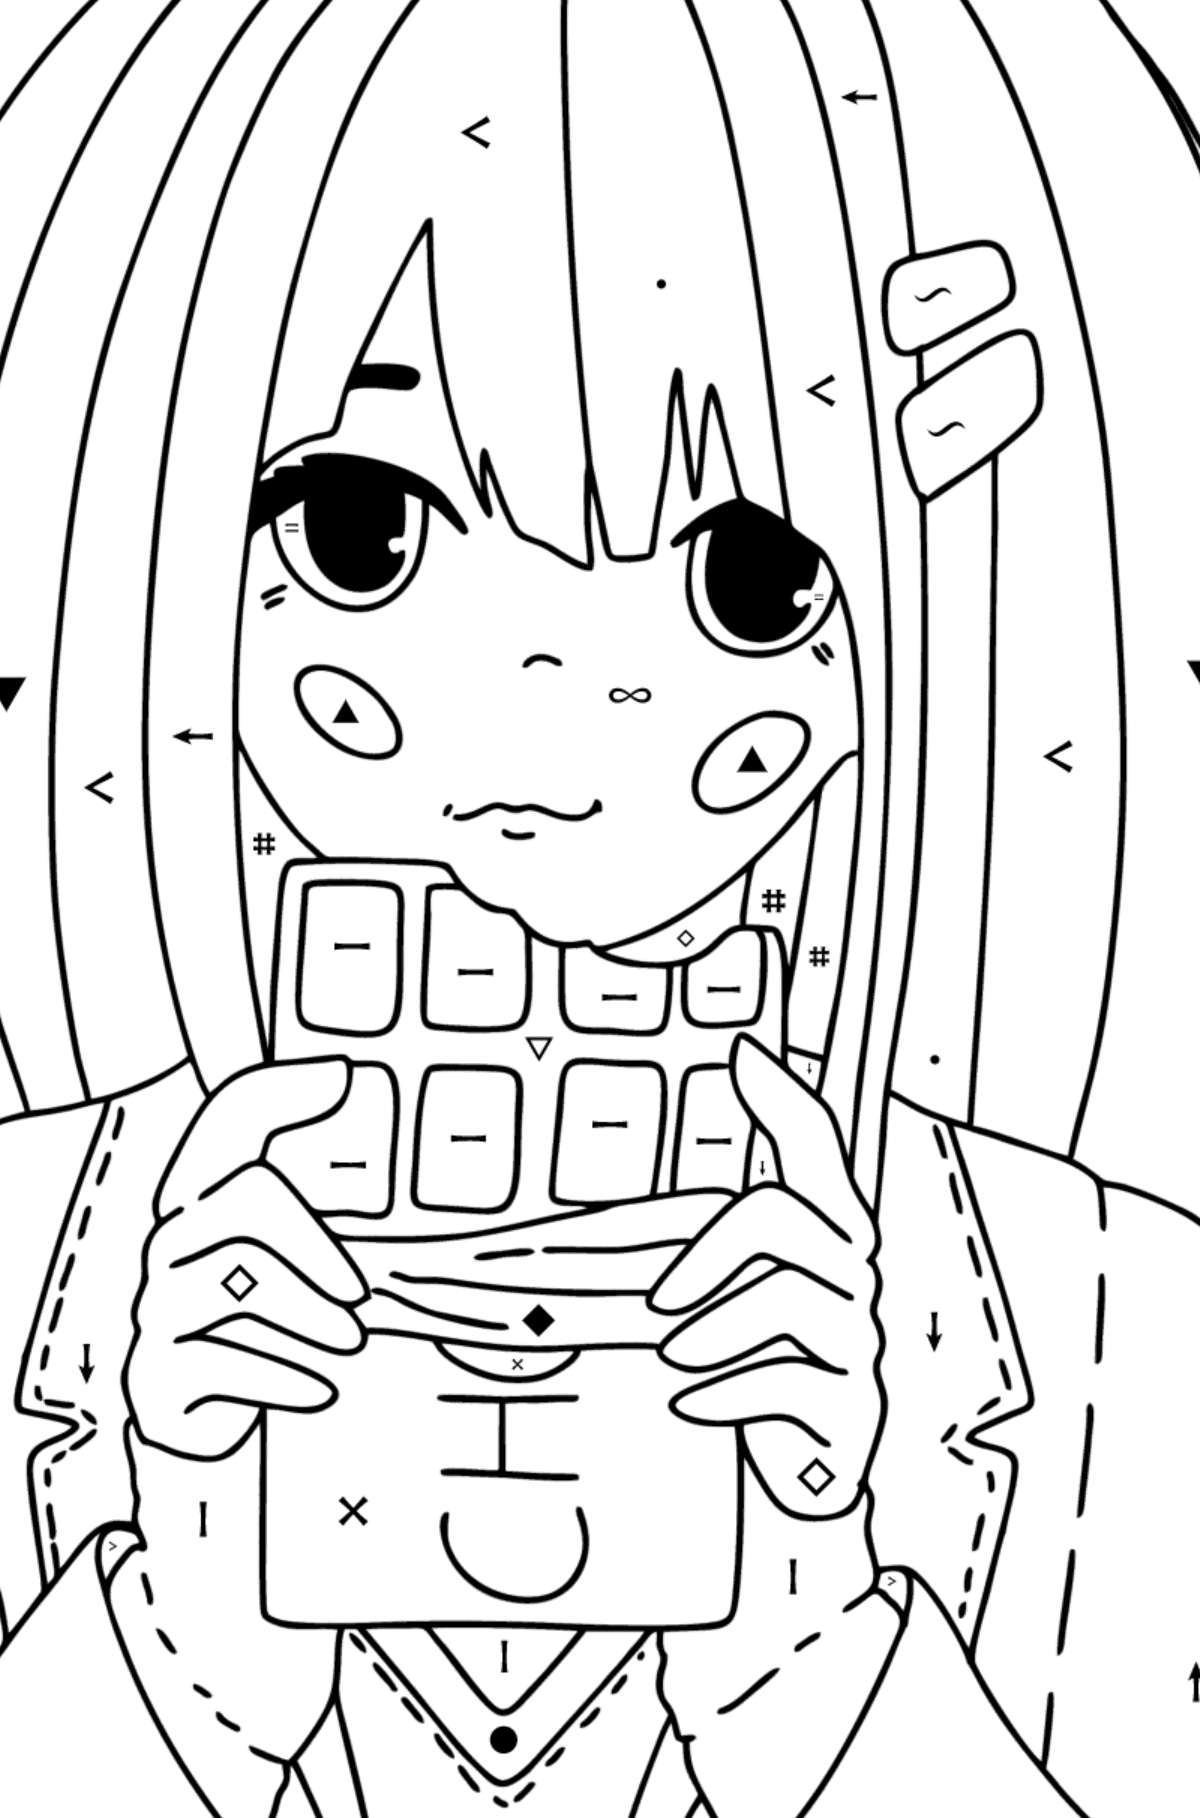 Coloring page charming anime girl - Coloring by Symbols for Kids